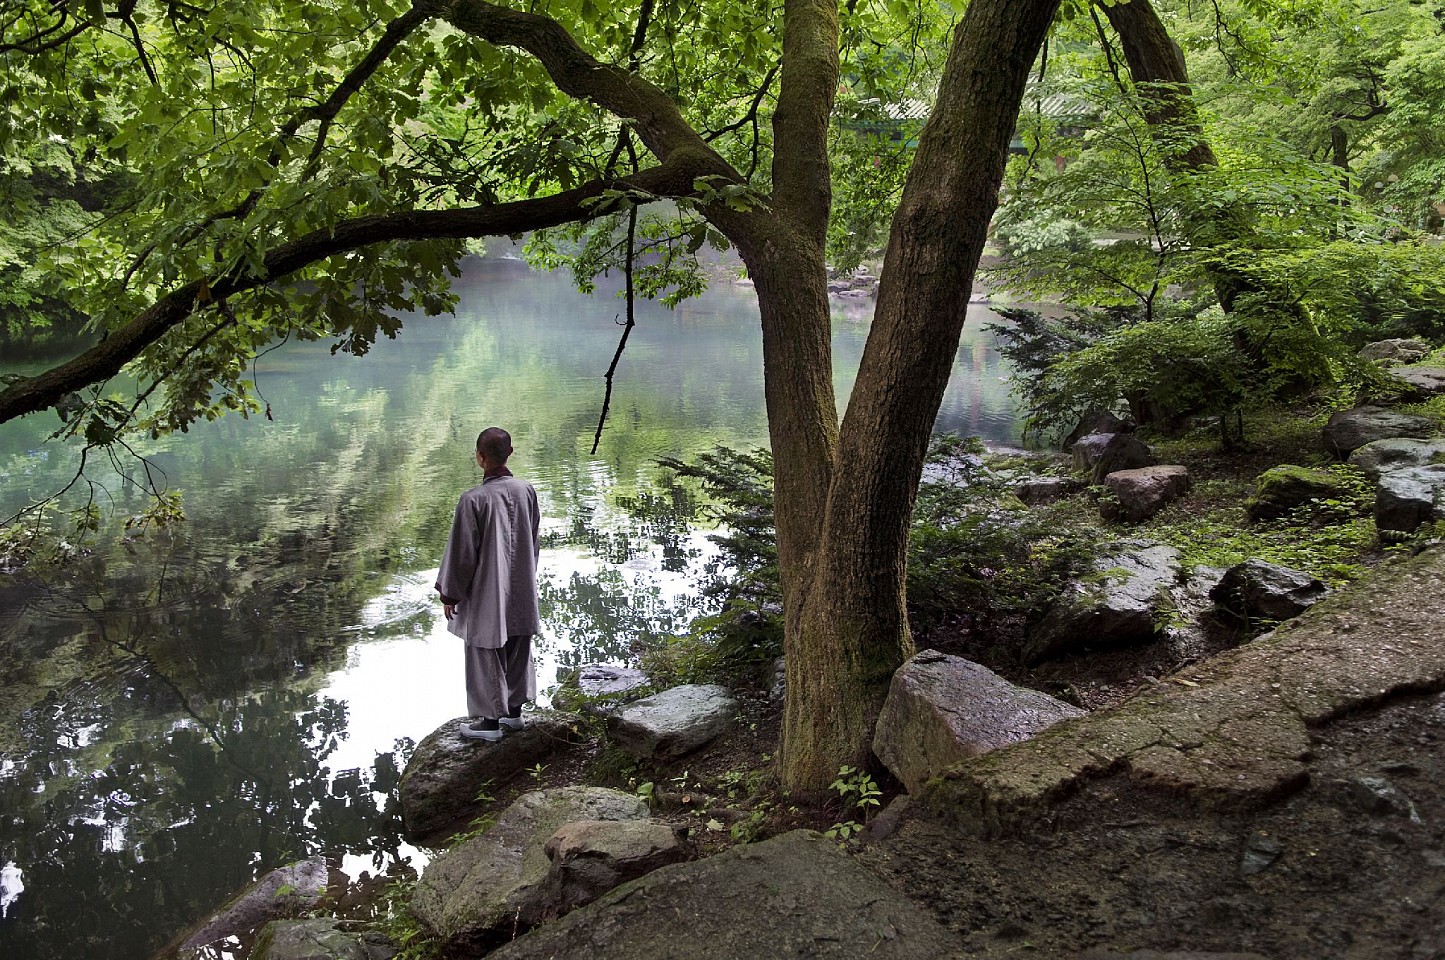 Steve McCurry, Monk in Contemplation, 2007
FujiFlex Crystal Archive Print
Price/Size on request